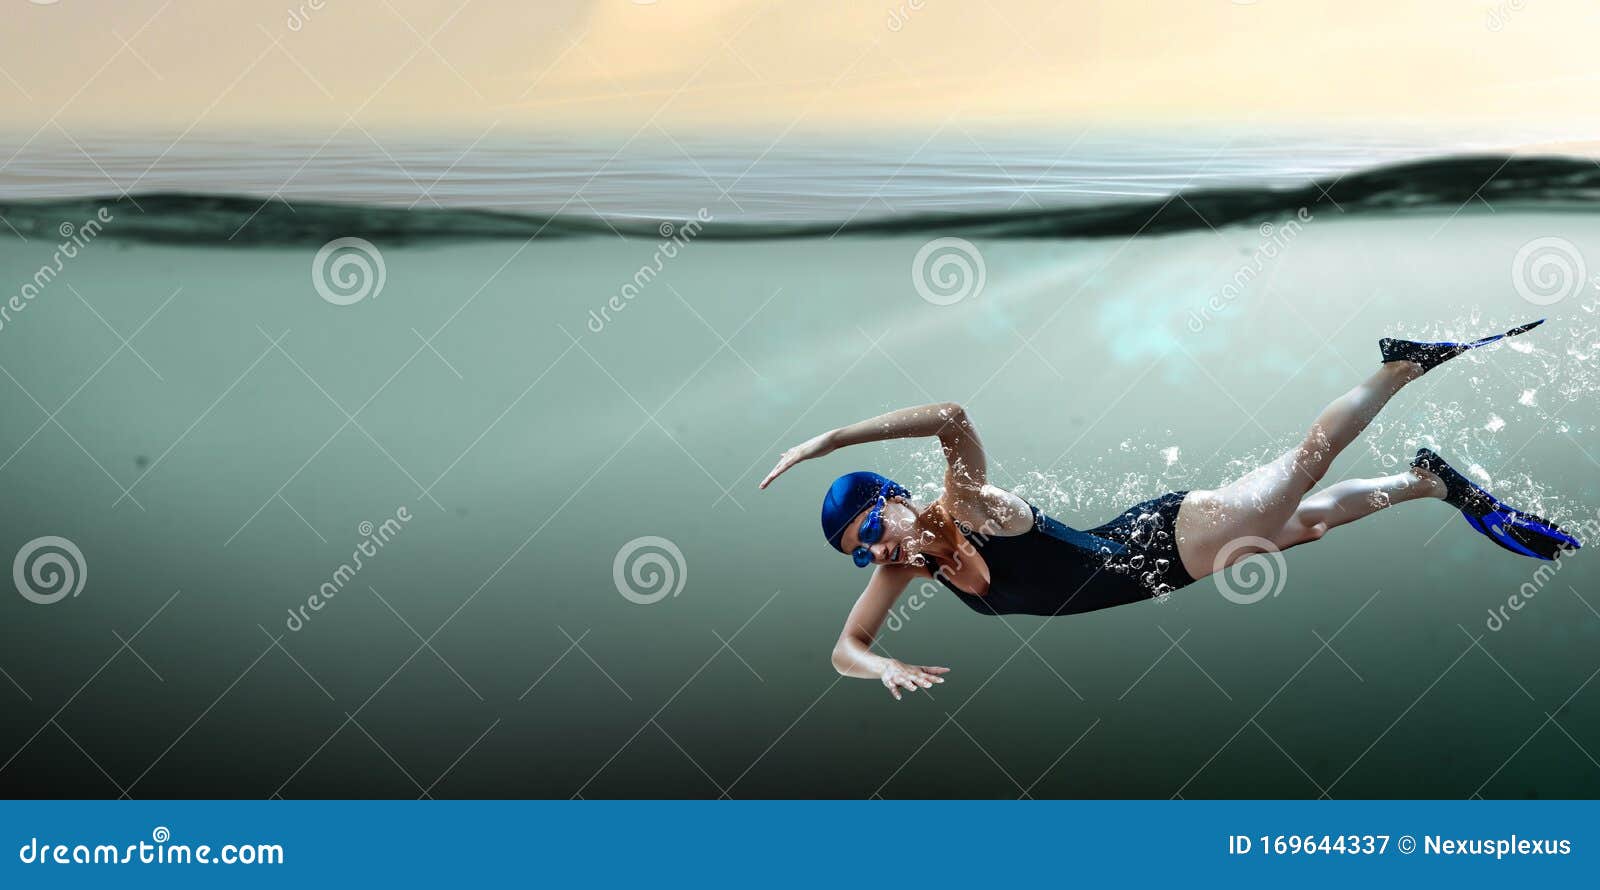 Swimmer in Flippers. Mixed Media Stock Image - Image of ocean, healthy ...